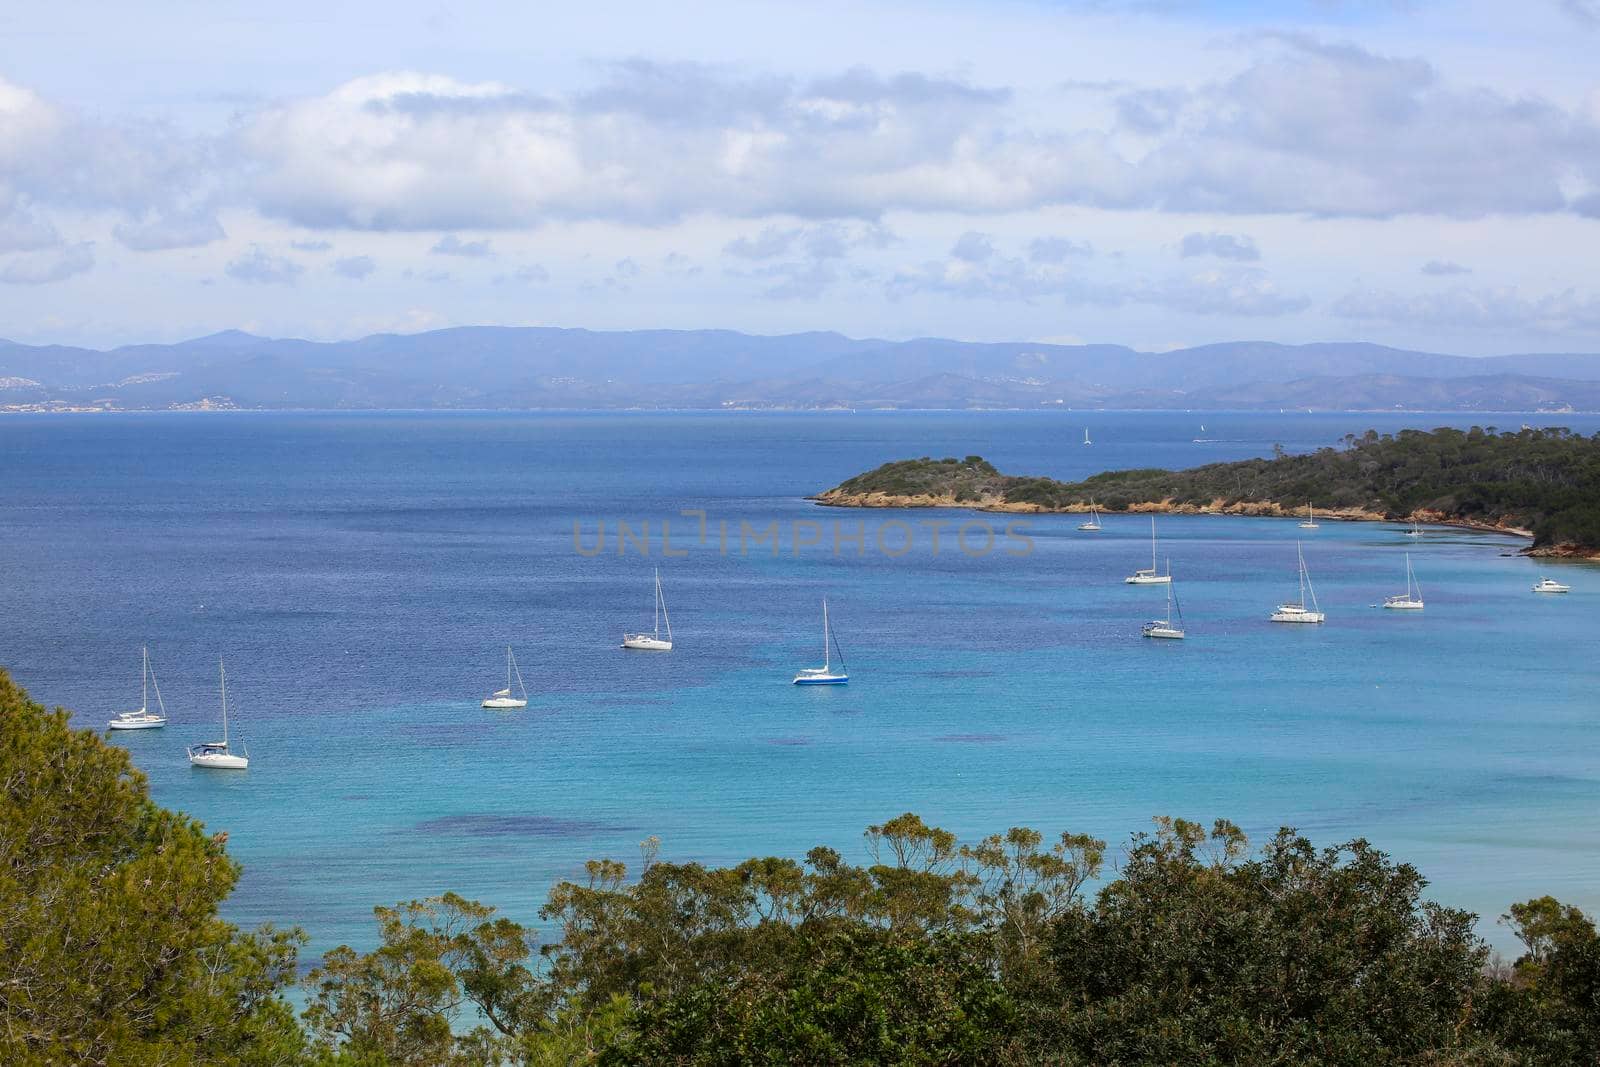 Photograph from the top of the Porquerolles Island coast with white sailboats, blue sea, green vegatation and blue sky